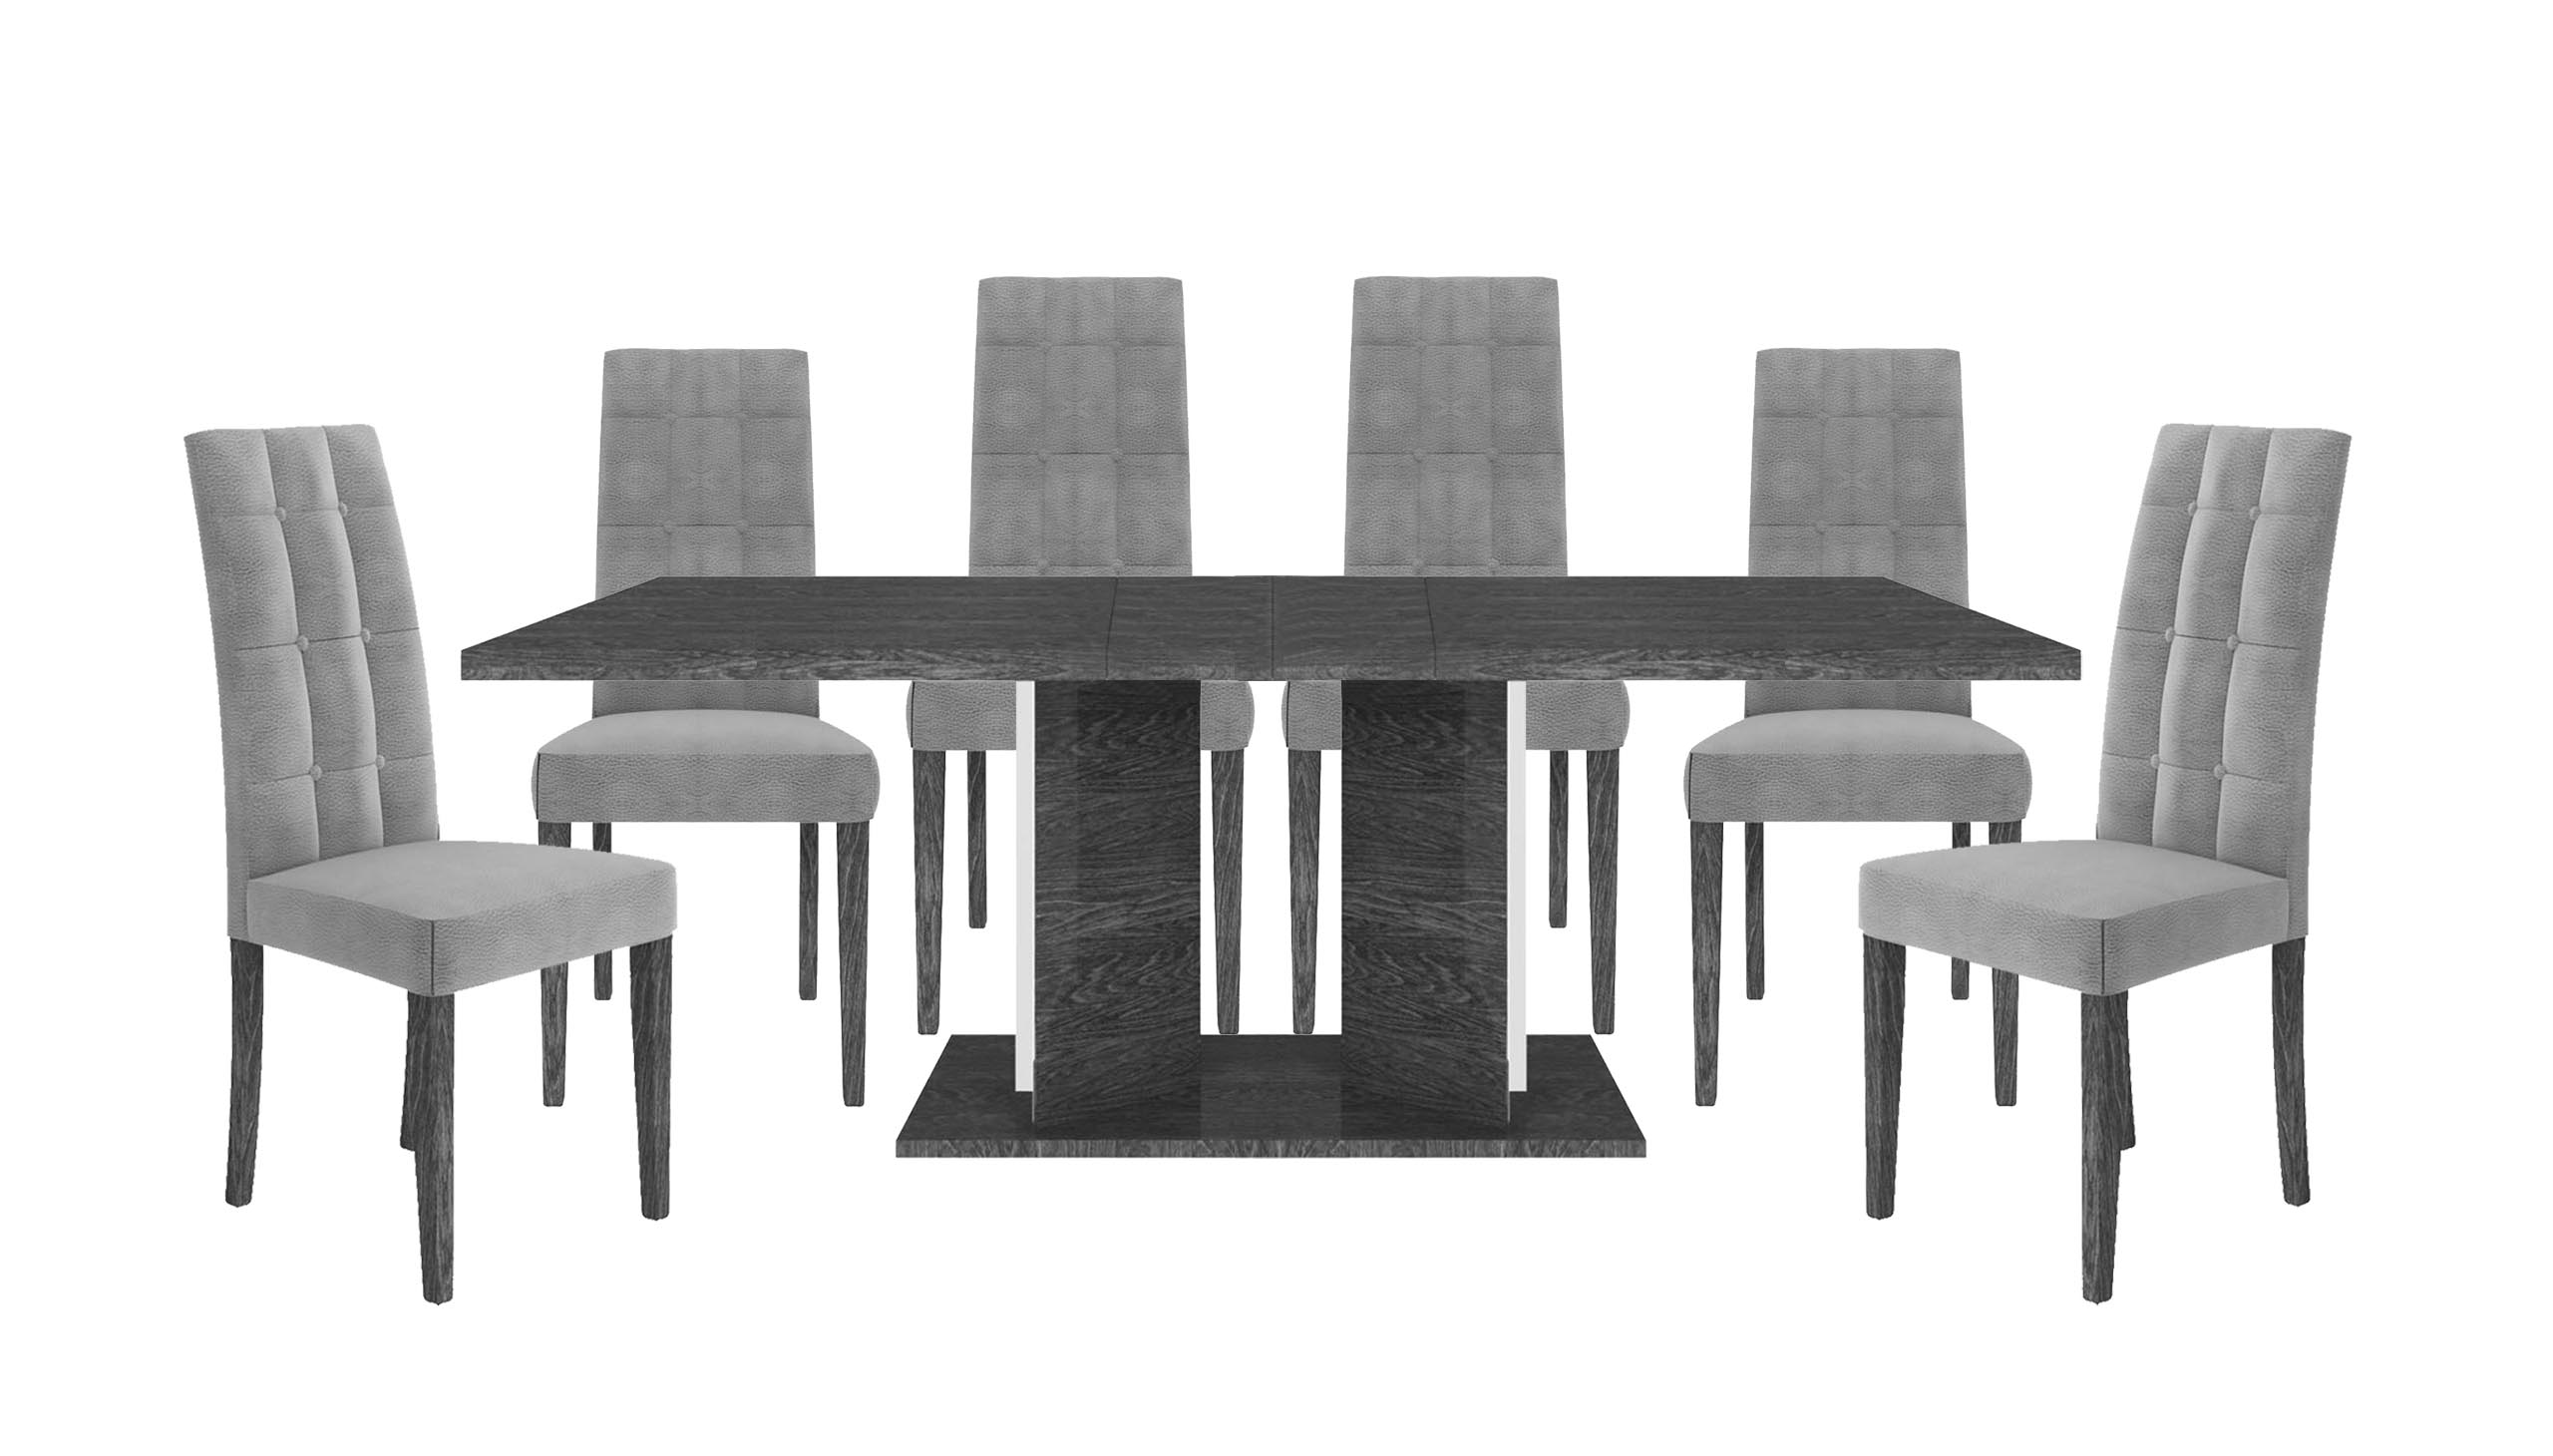 Mia Double Extending Dining Table with 6 Chairs